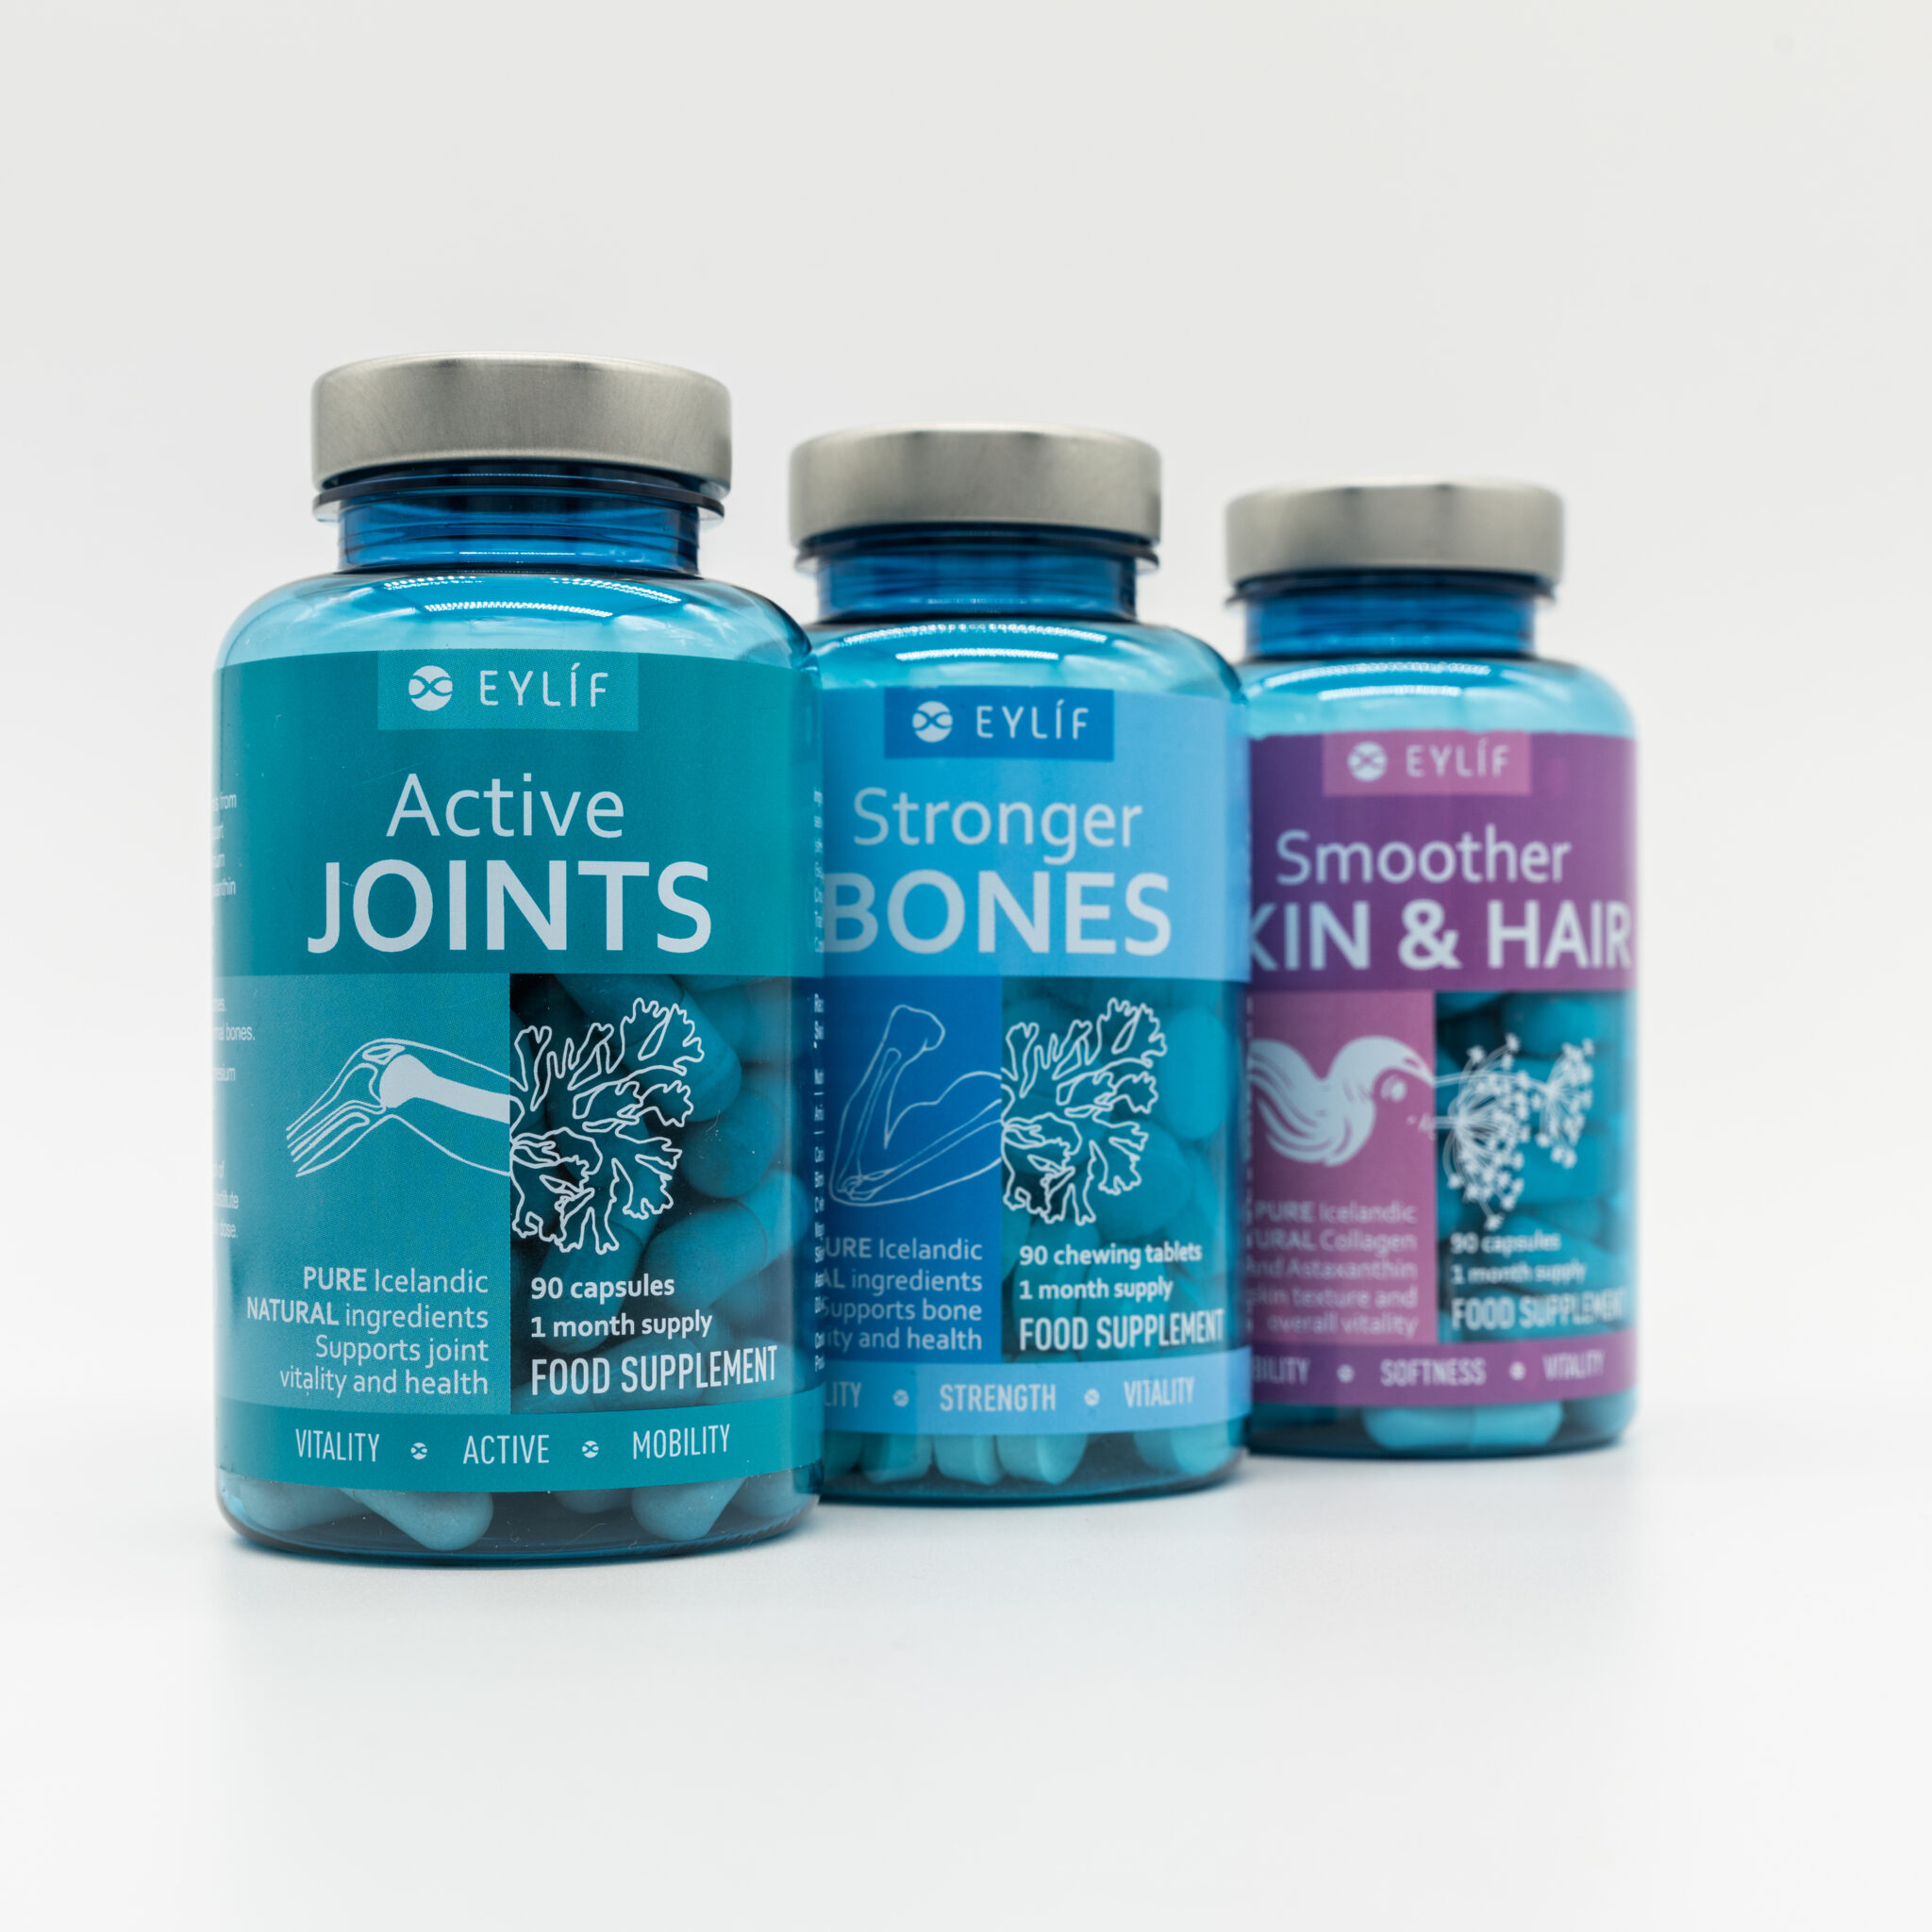 Active JOINTS